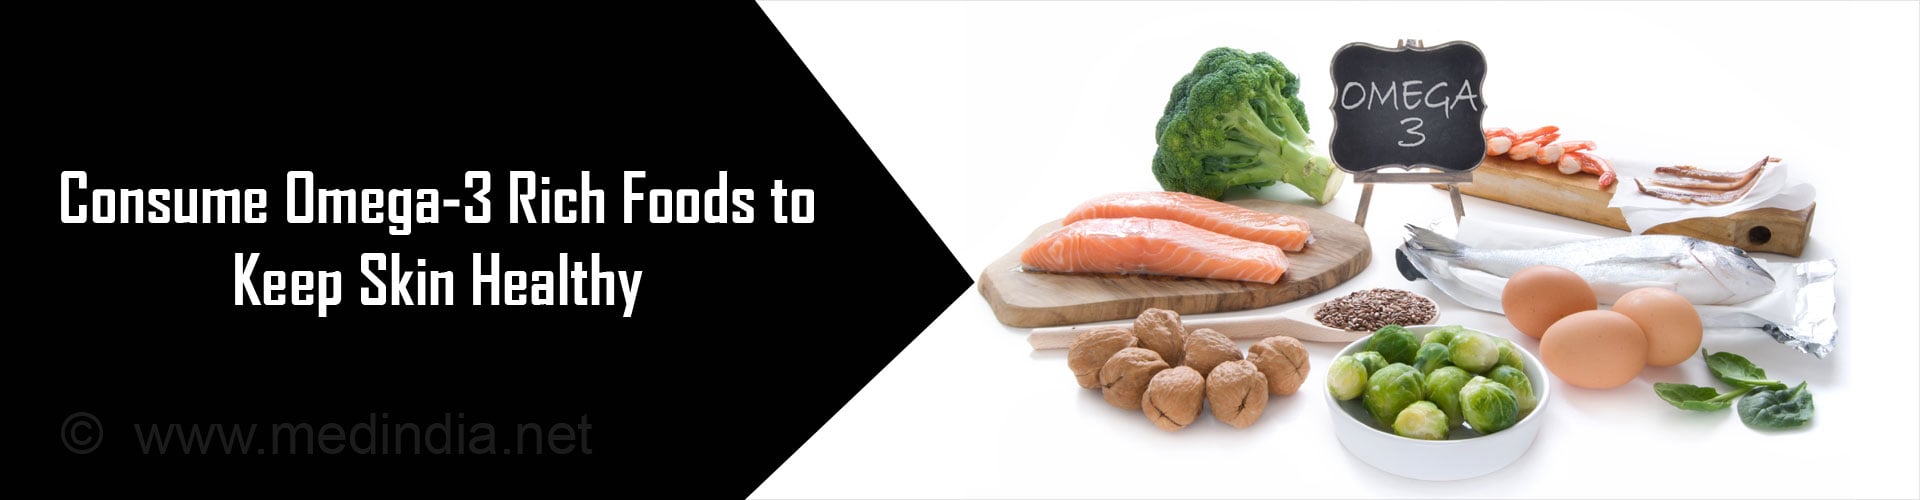 Consume Omega-3 Rich Foods to Keep Skin Healthy